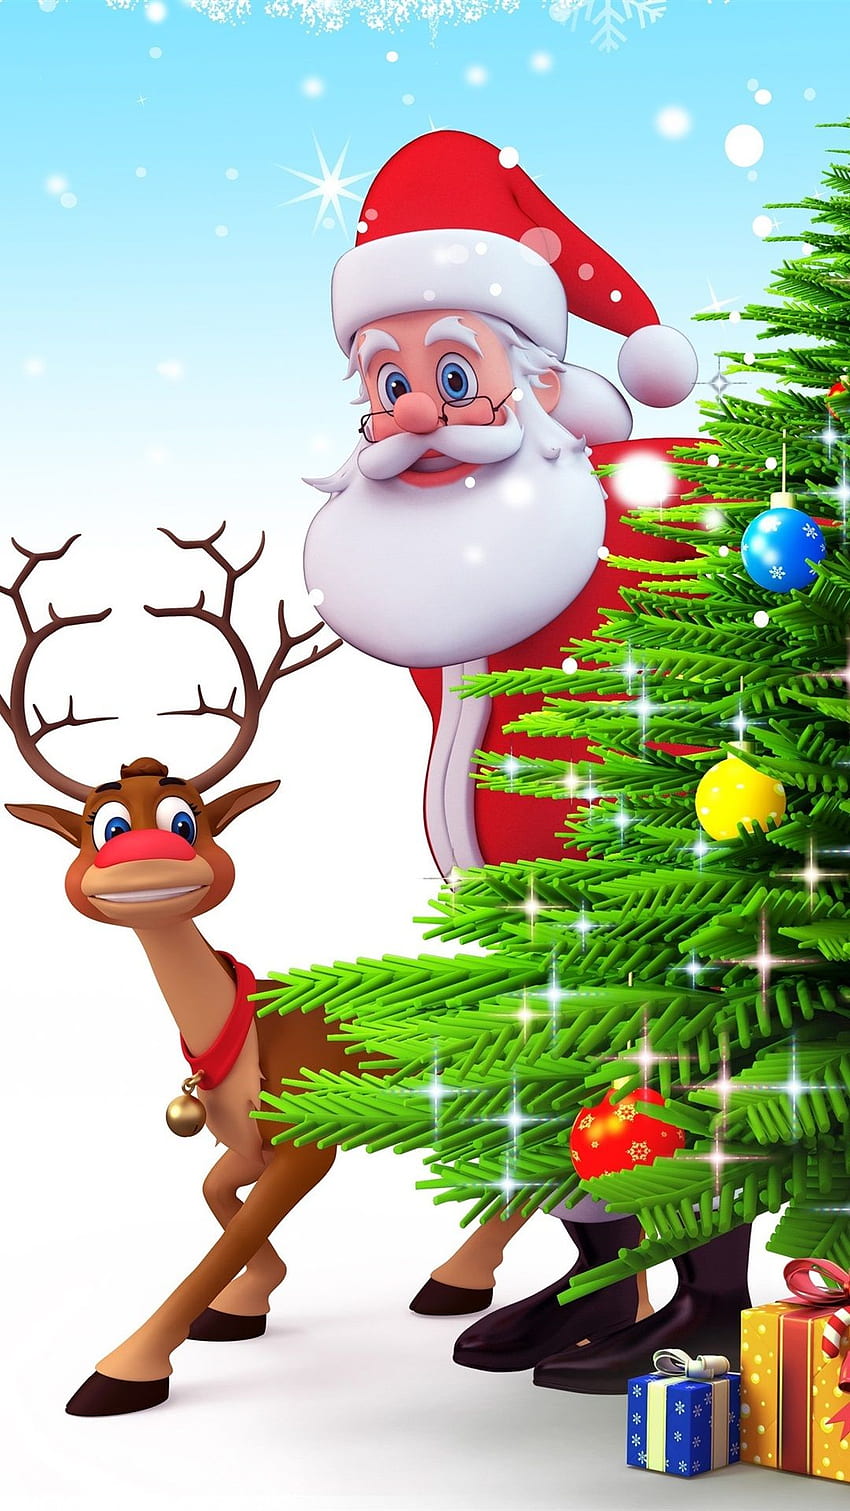 Christmas 3D Live Wallpaper - Android Apps on Google Play | Christmas live  wallpaper, Live wallpapers, Live wallpaper for pc